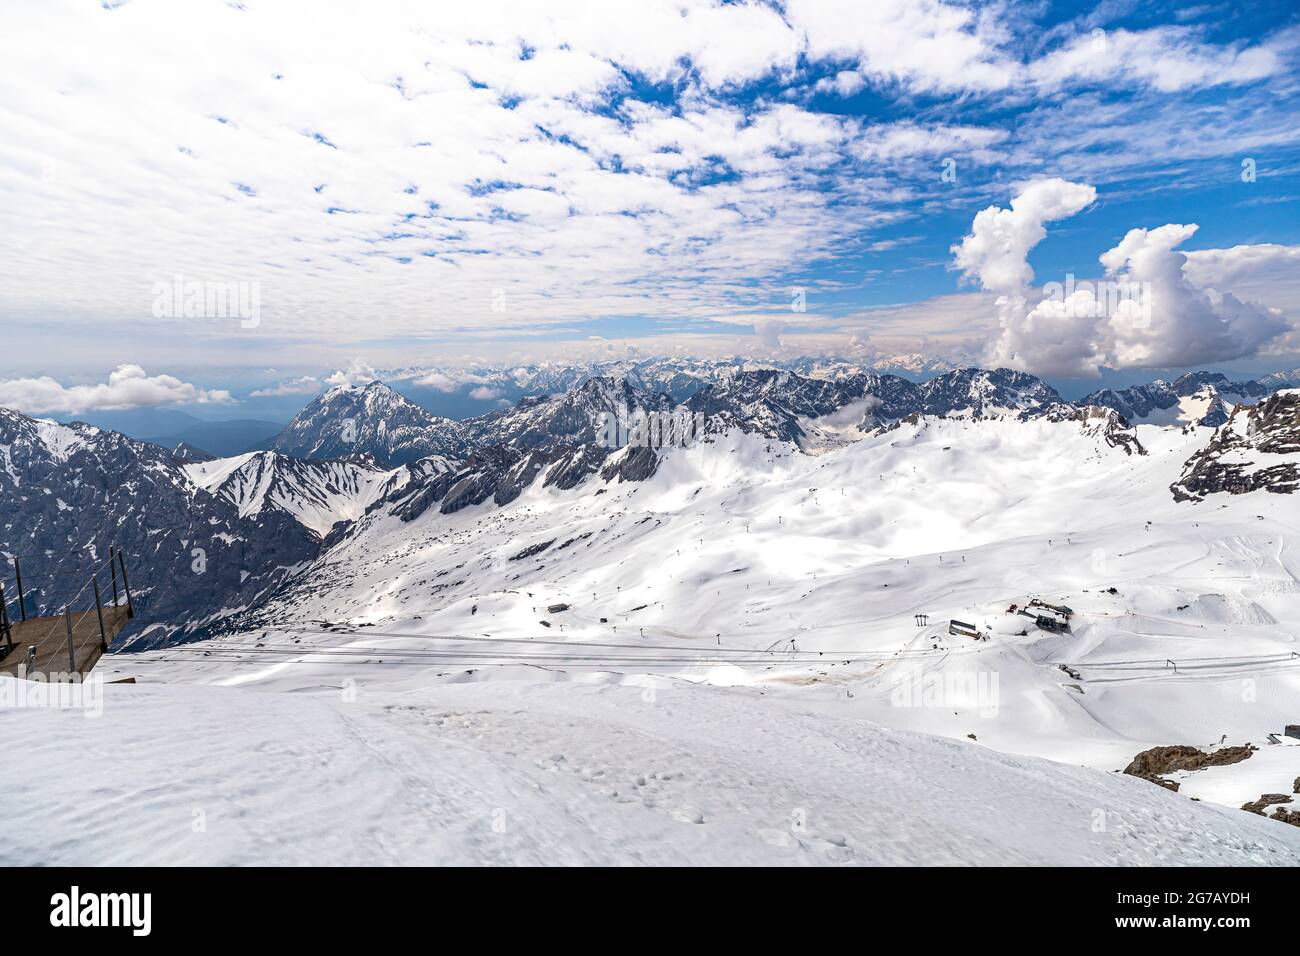 View from Zugspitz summit on glacier and mountain landscape in the snow, Grainau, Upper Bavaria, Germany Stock Photo